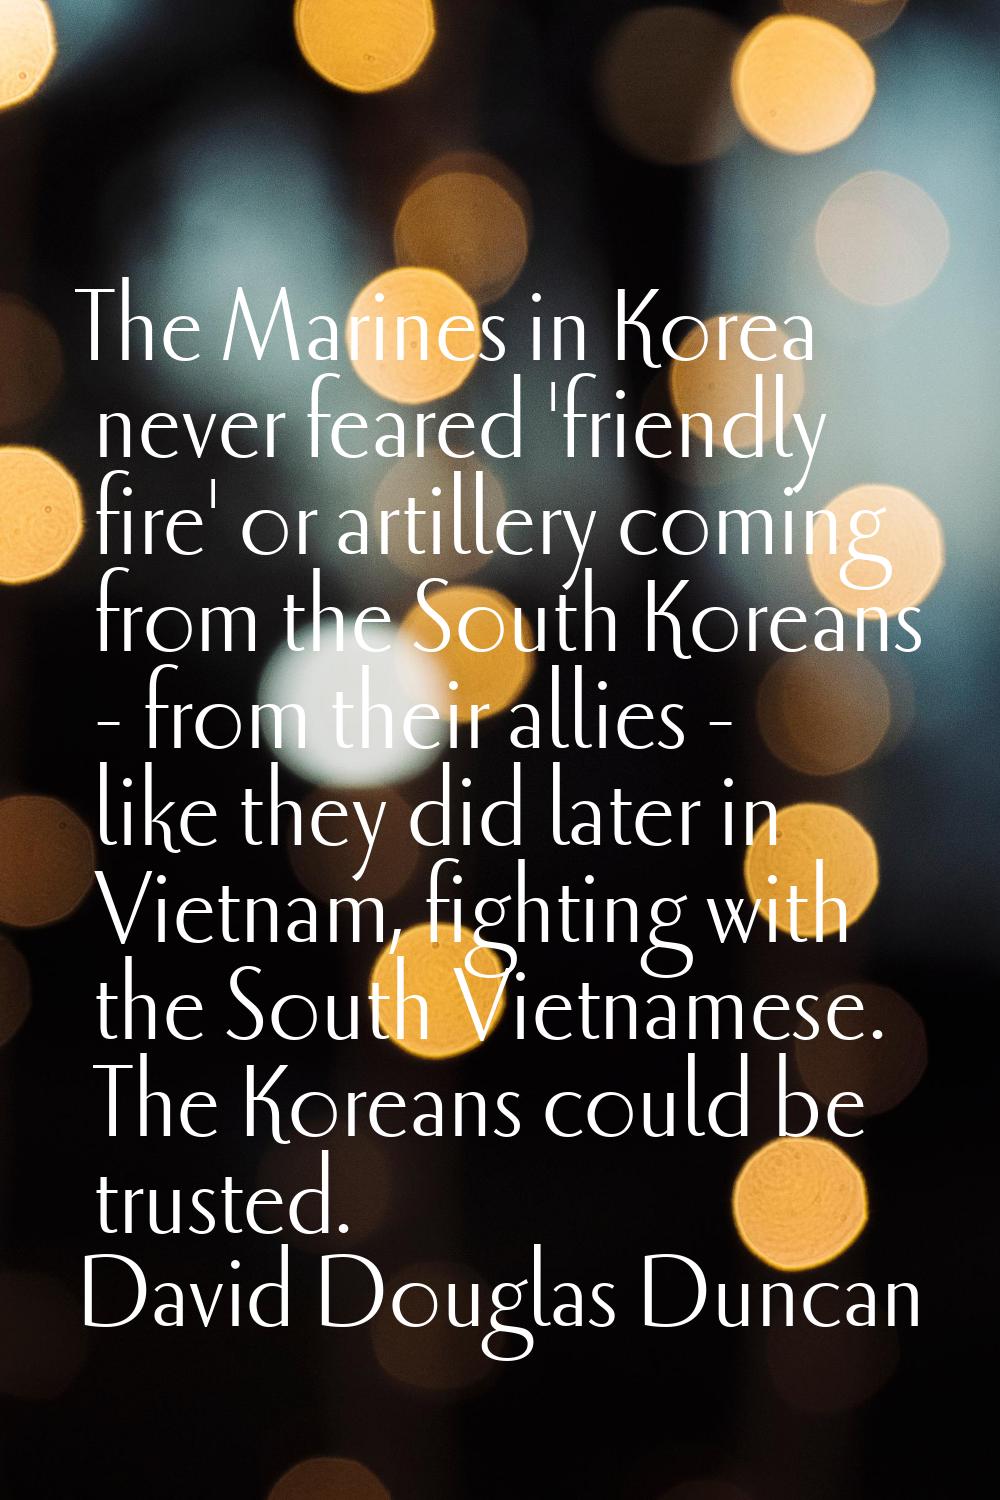 The Marines in Korea never feared 'friendly fire' or artillery coming from the South Koreans - from